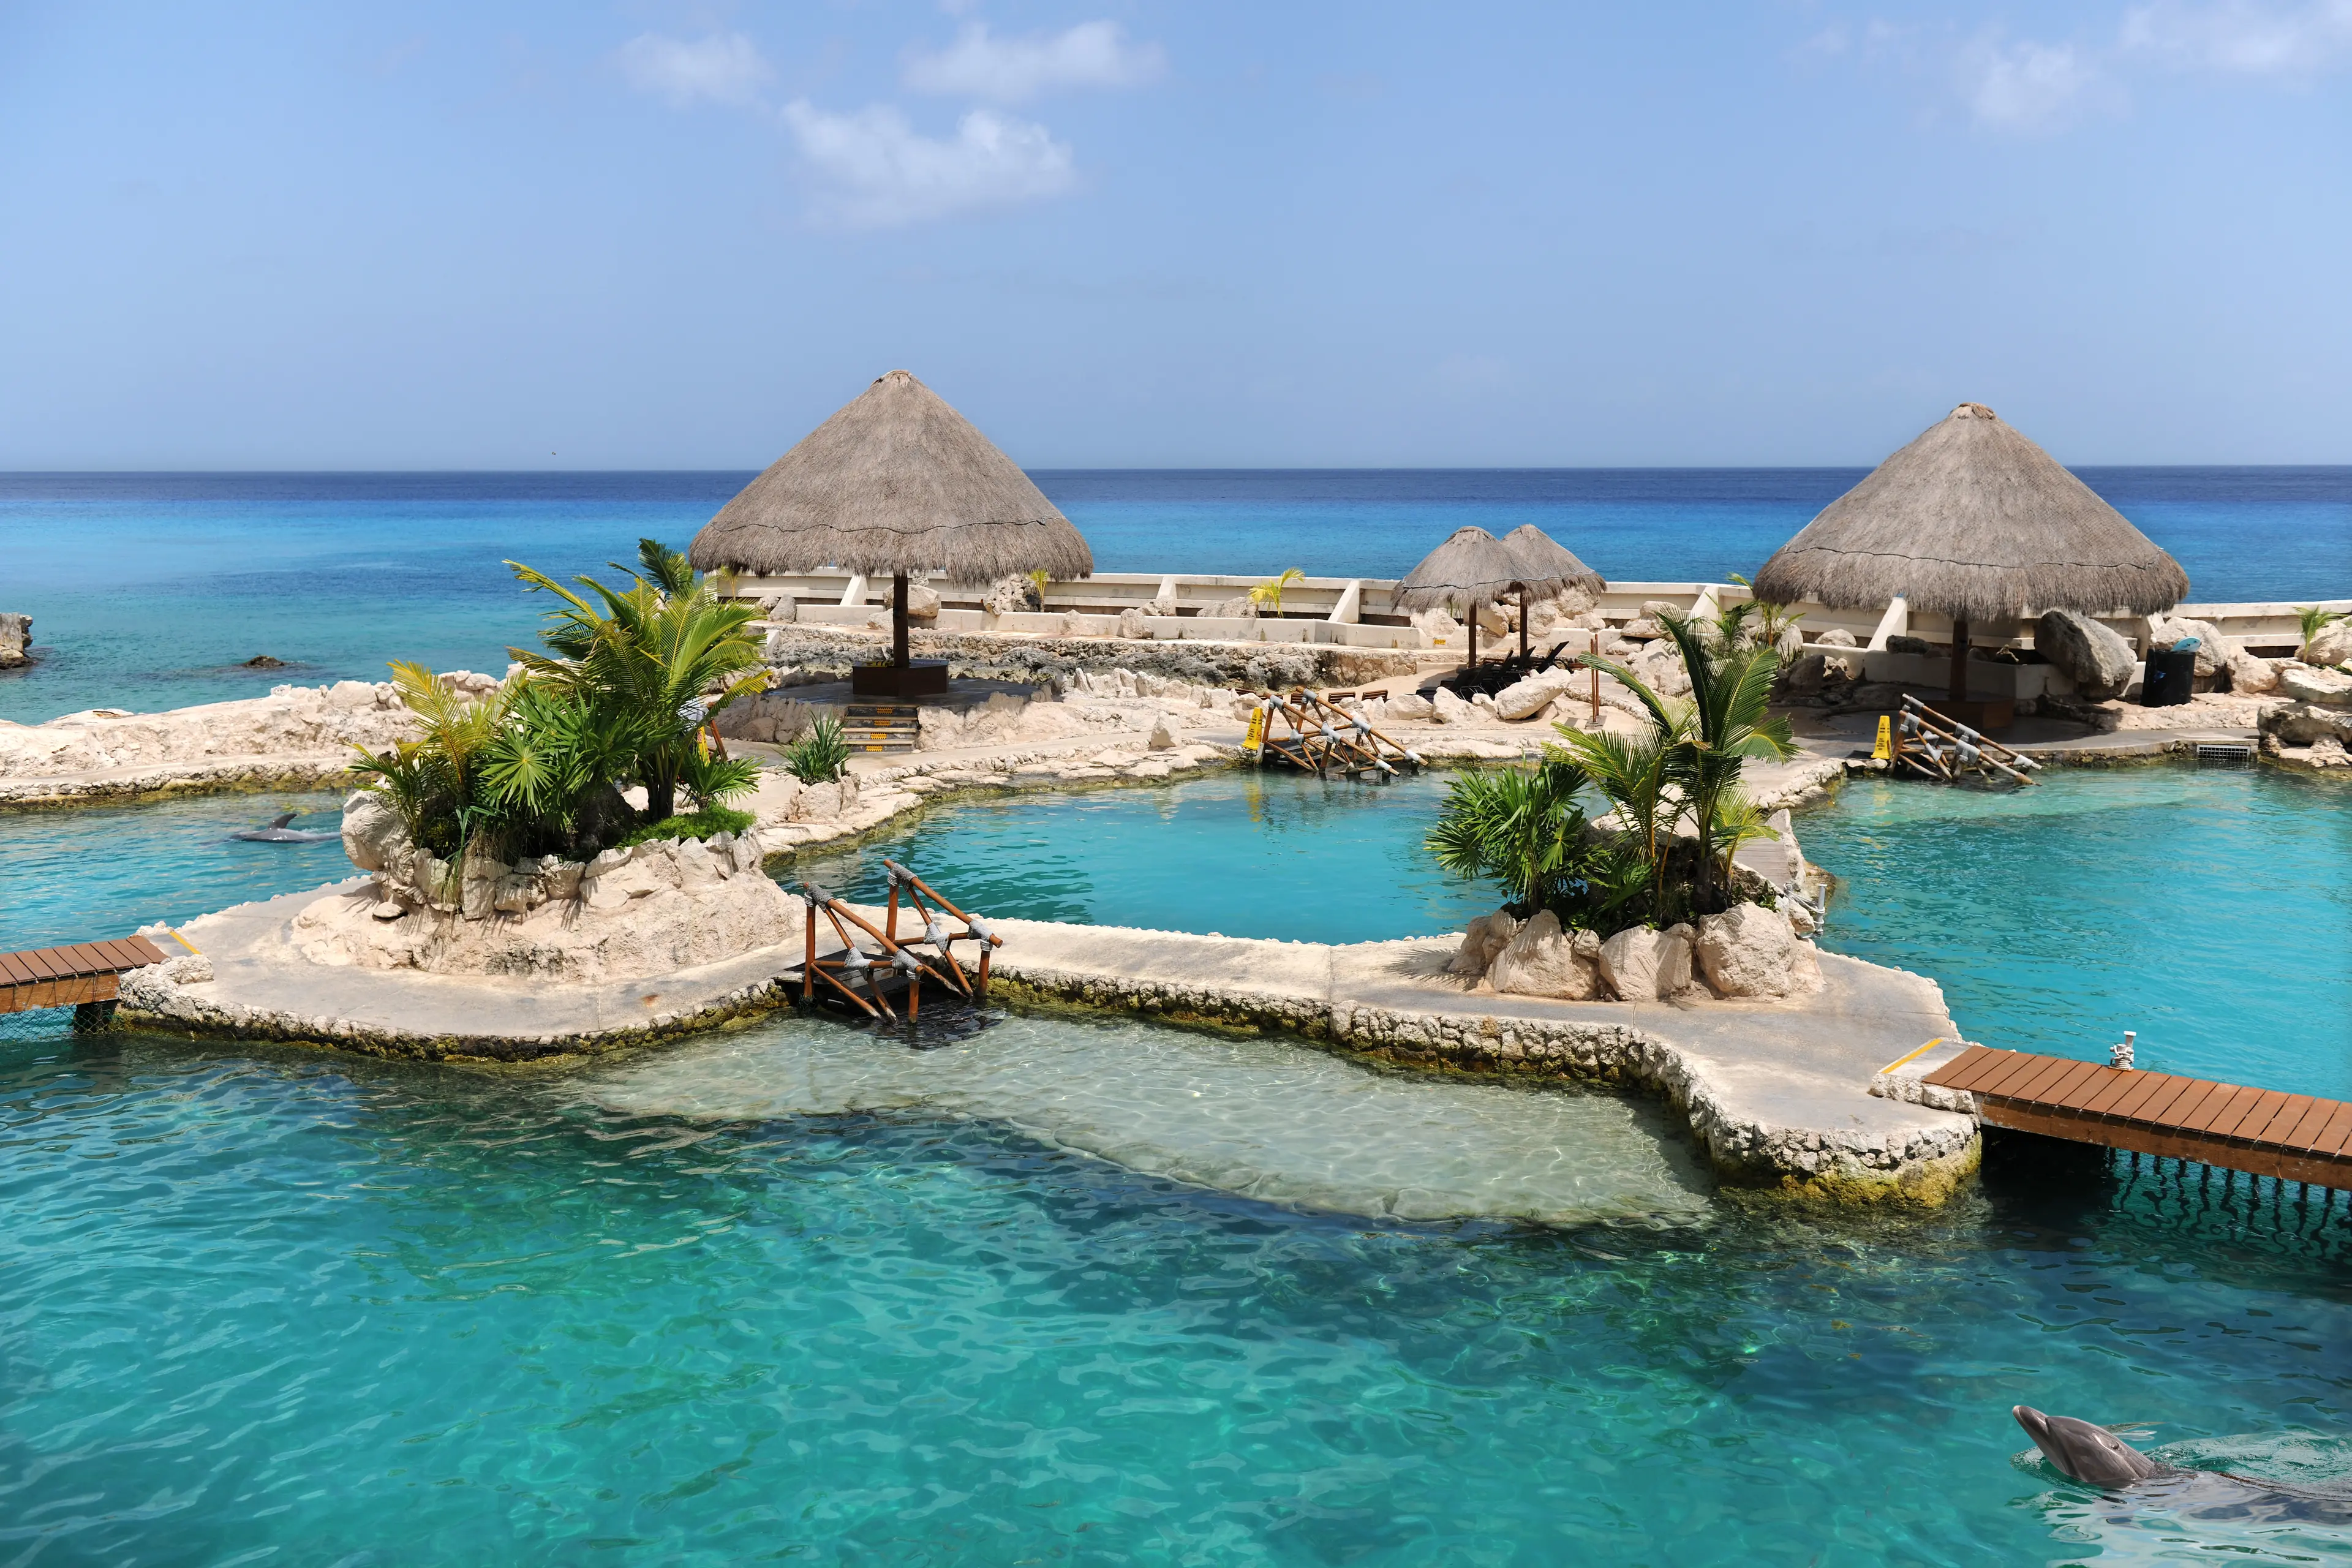 1-Day Solo Local Experience with Outdoor Sightseeing in Cozumel